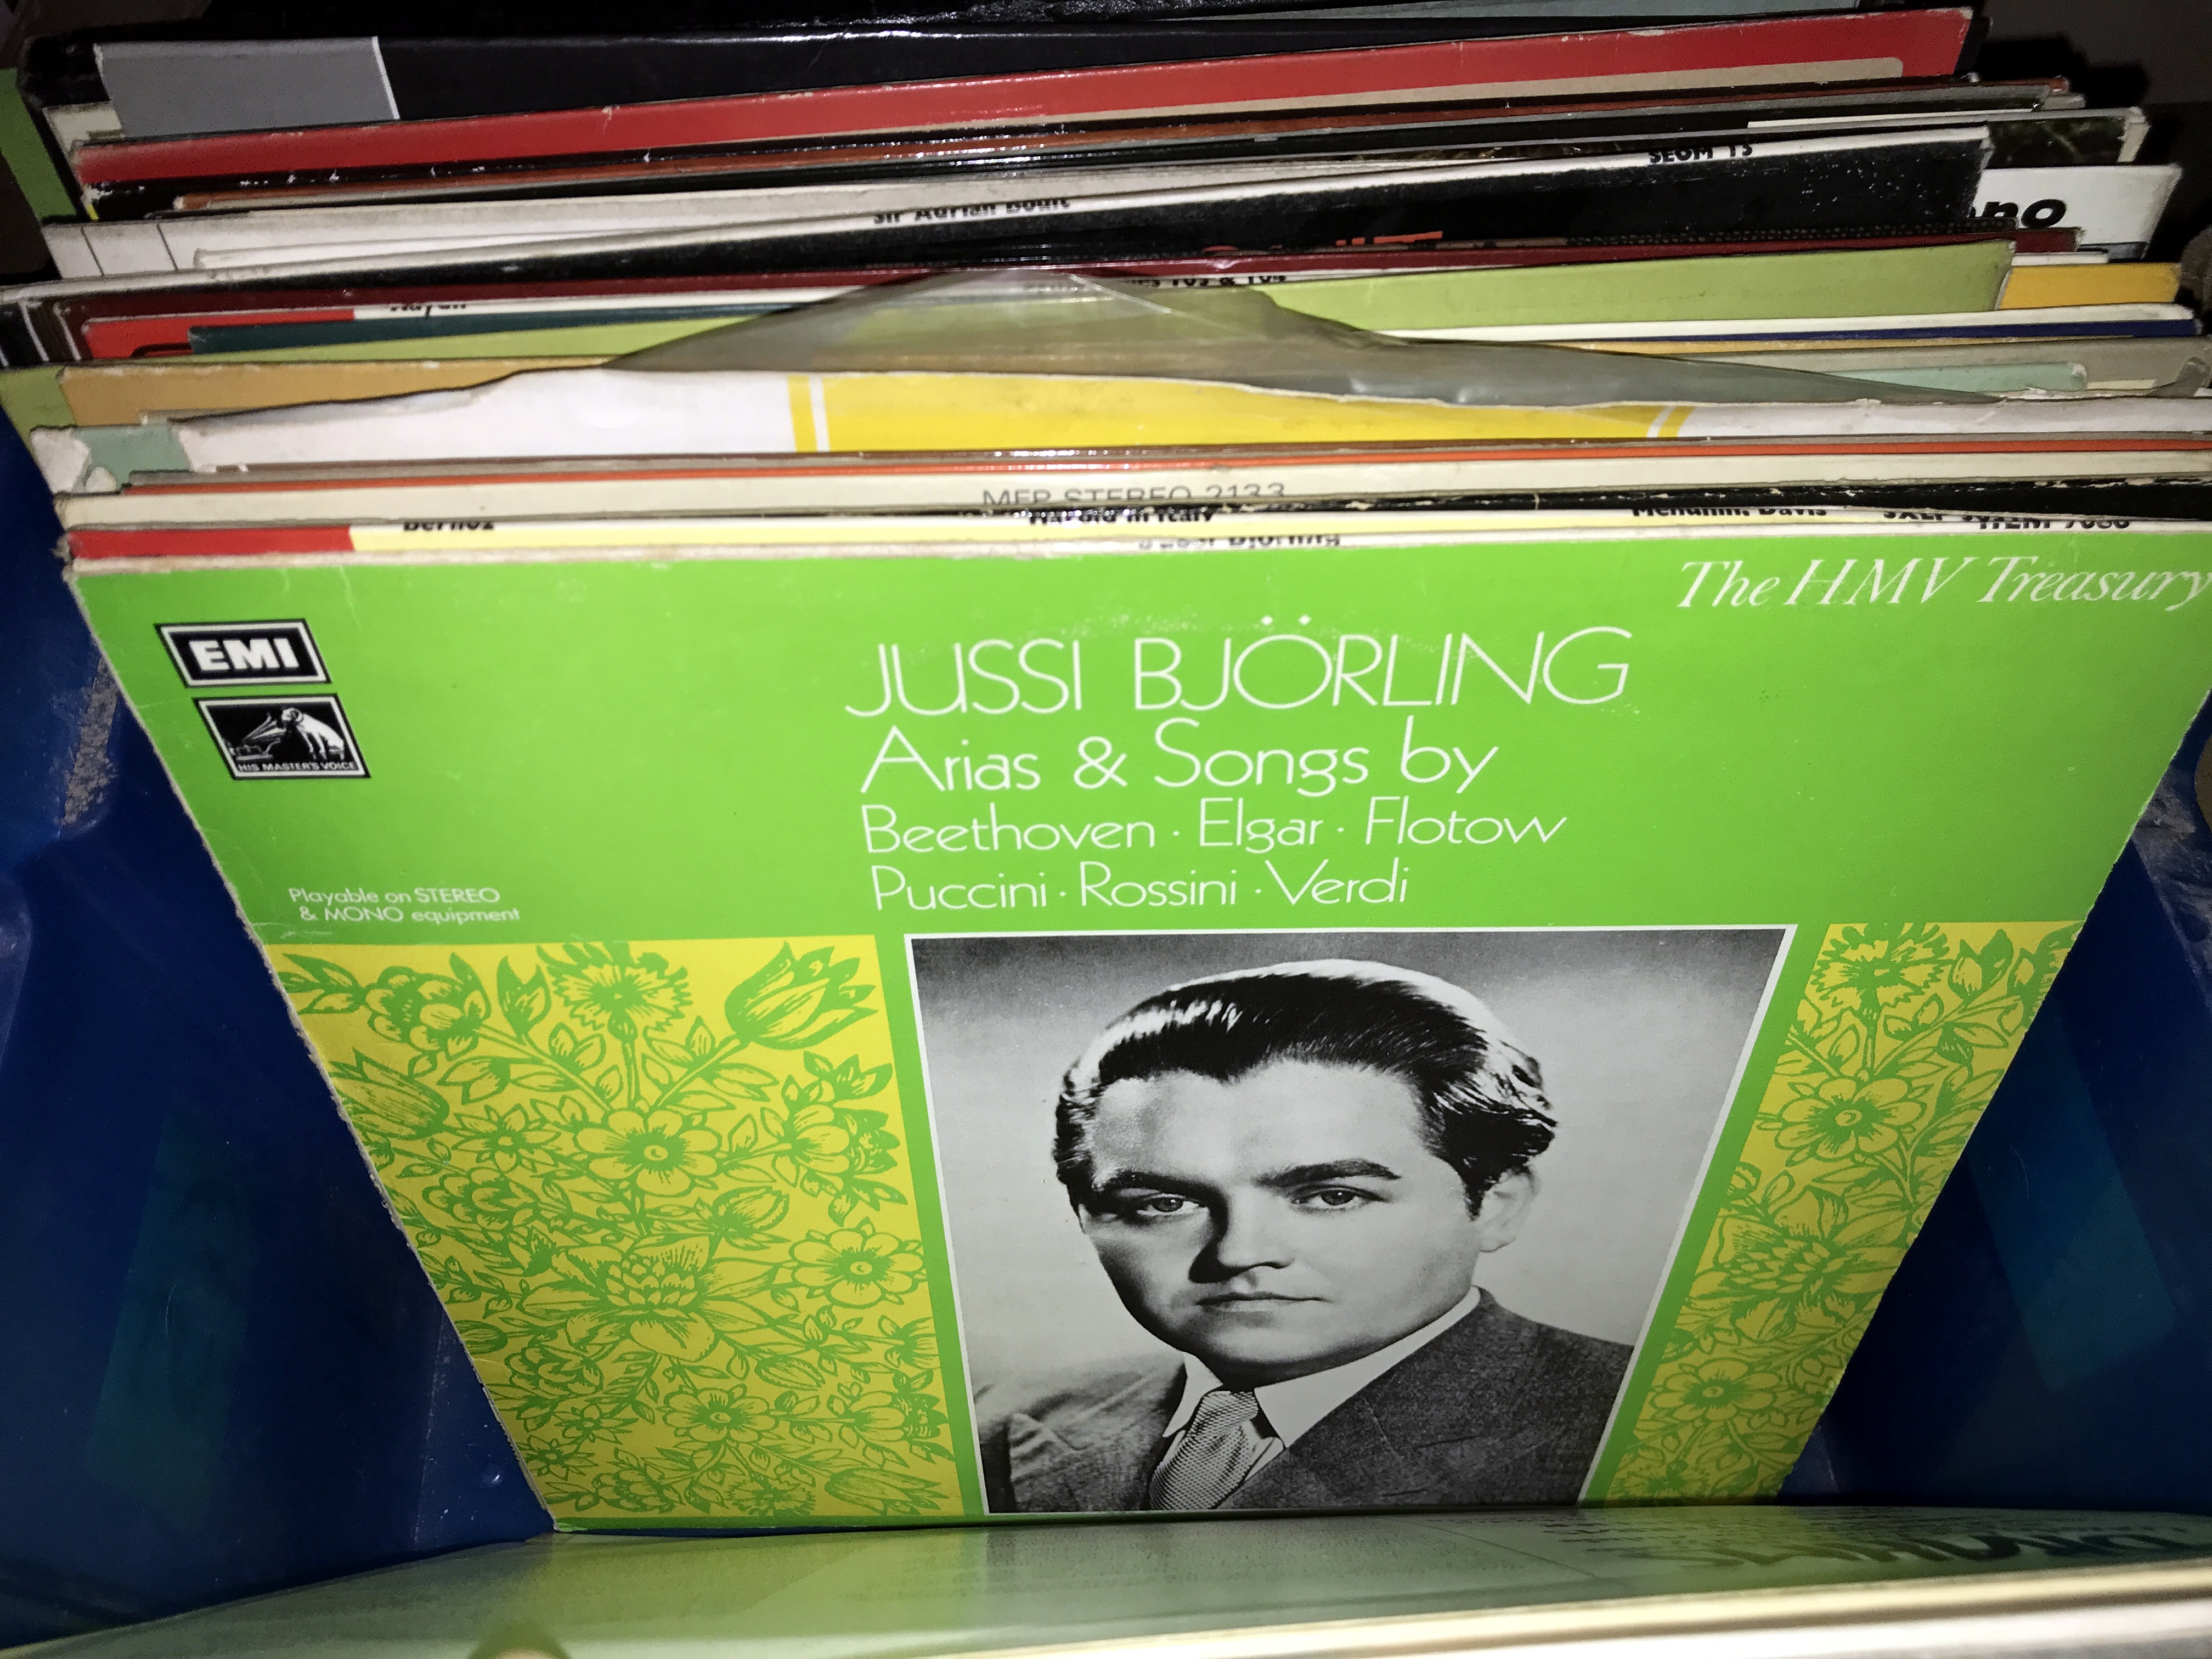 Over 150 classical LP records includes sxl wide band, asds, - Image 17 of 19